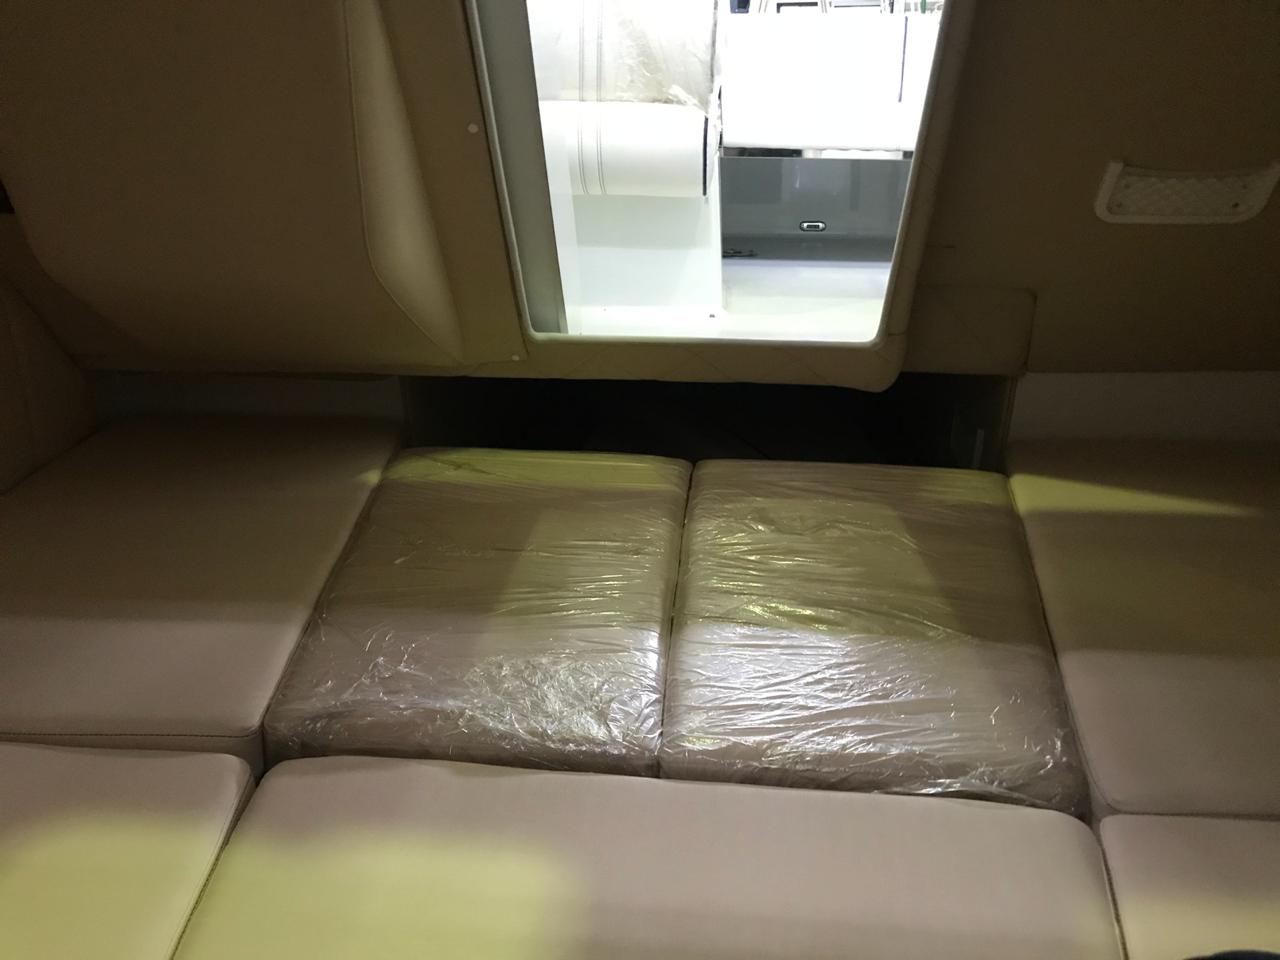 Extra cushion in the cabin